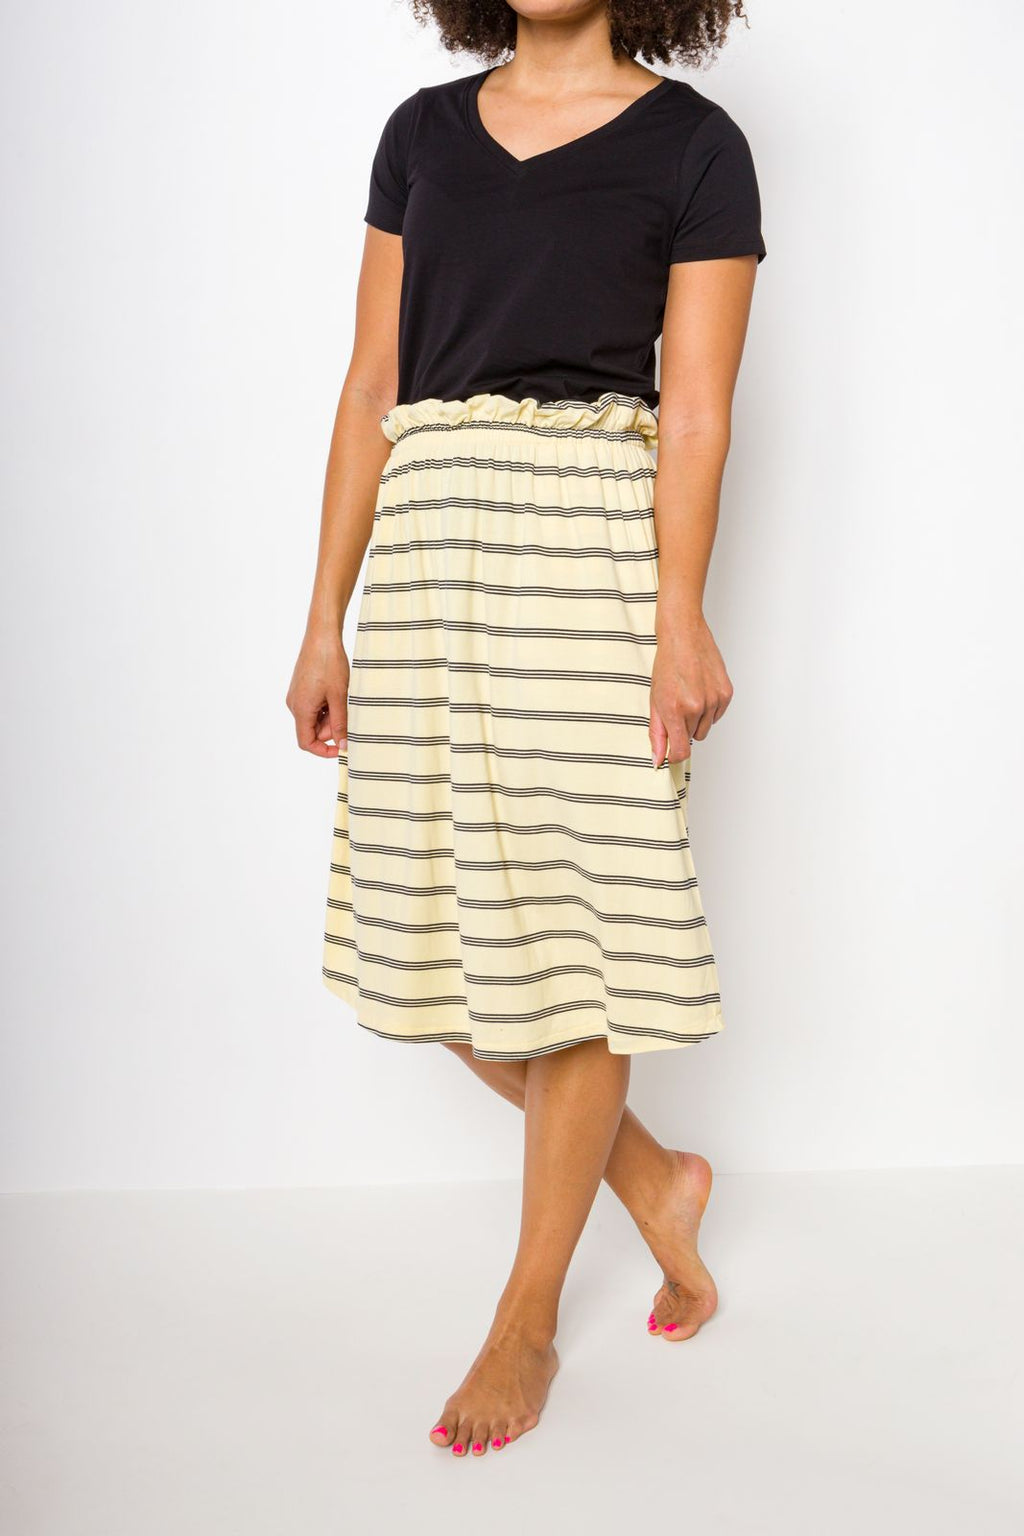 Dresses and Skirts – Ably Apparel